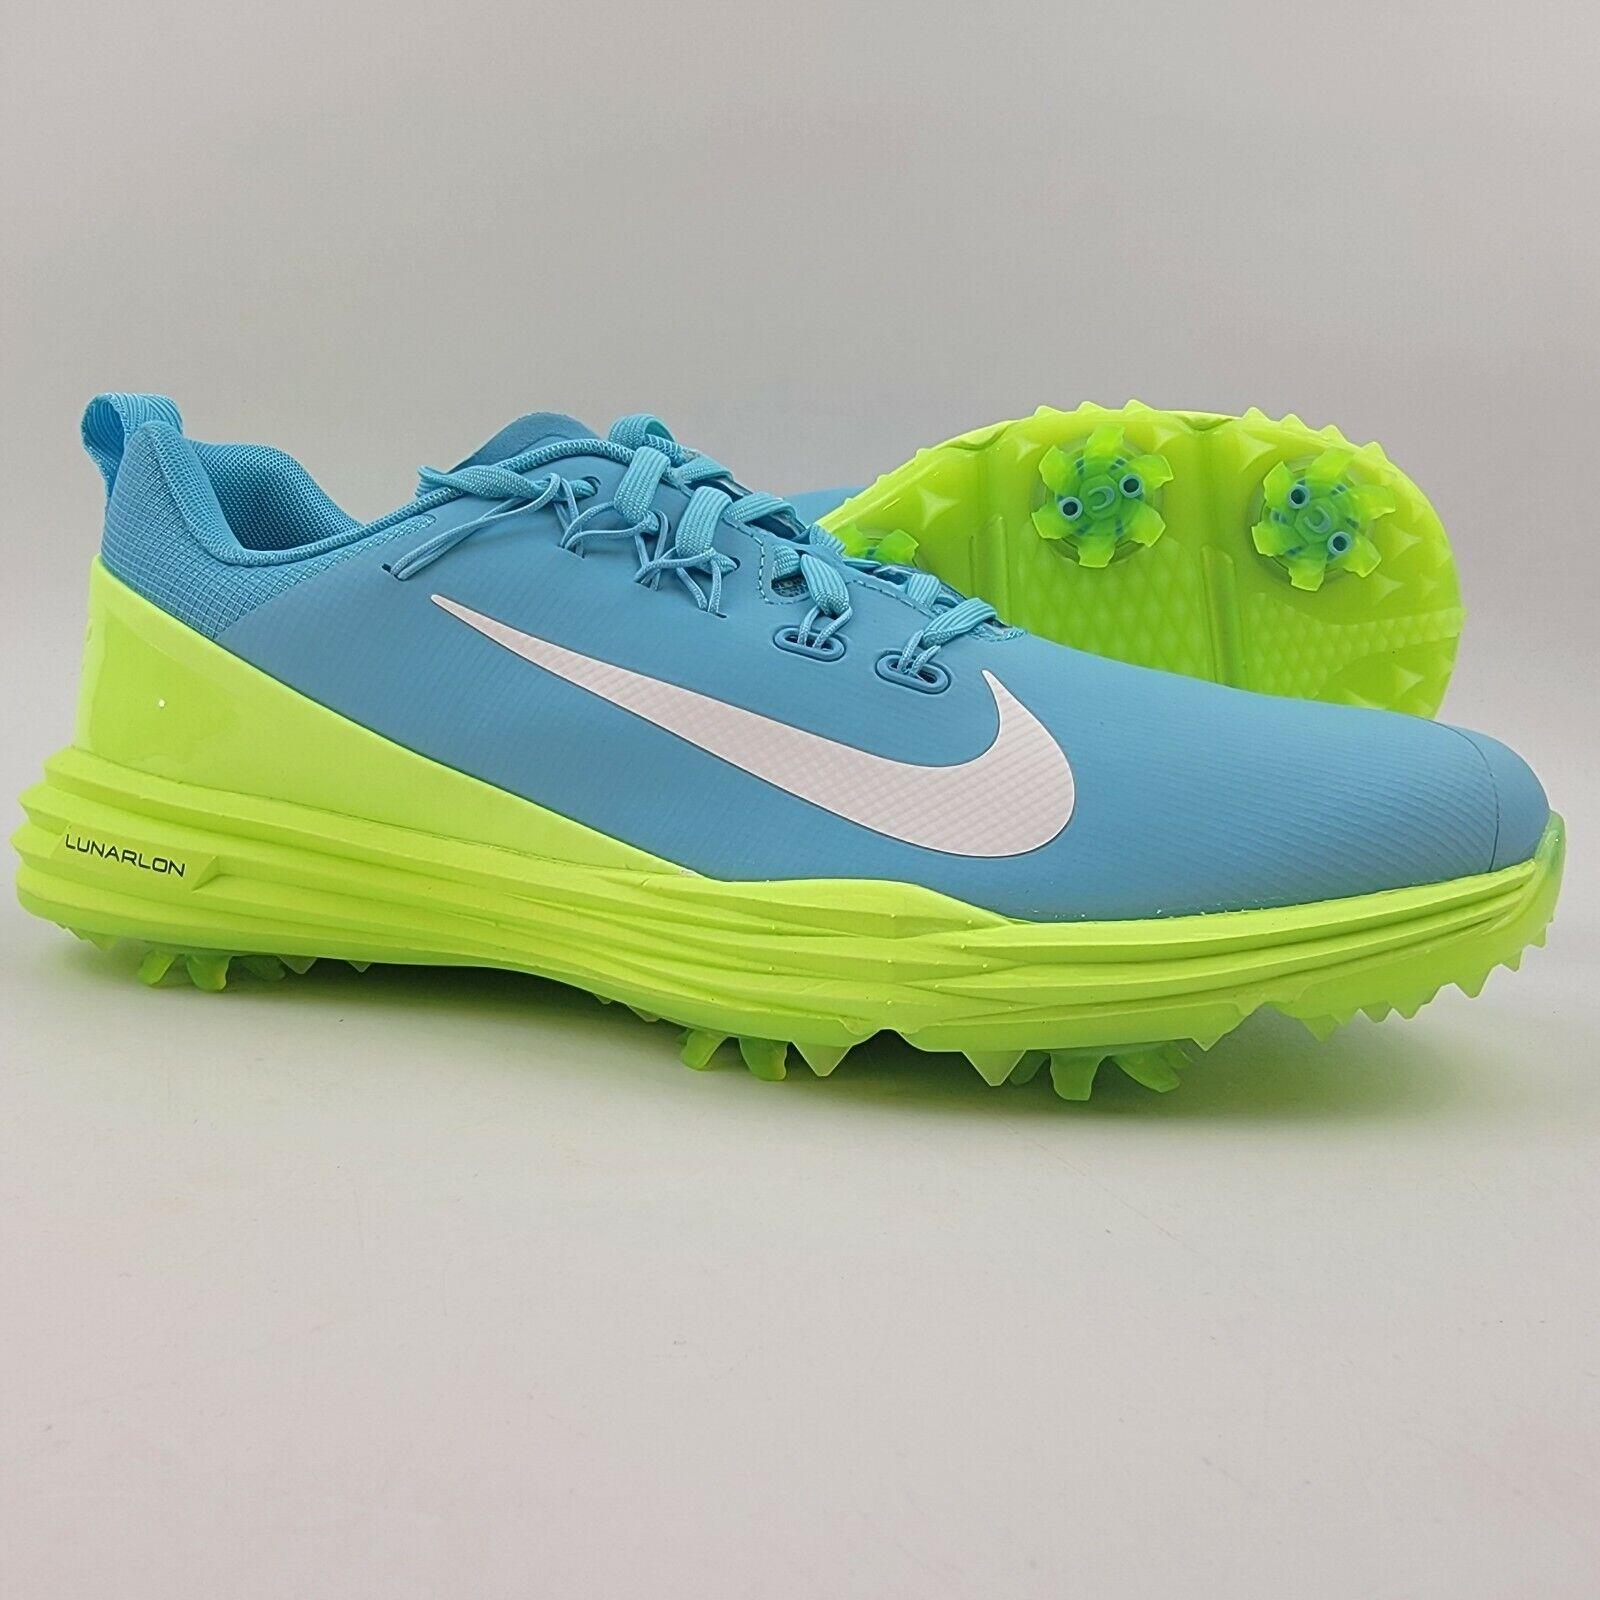 Lunar Command 2 Golf Shoes Sky Blue Ghost Green 880120-400 Womens 7.5 | - Nike shoes Command - Blue |